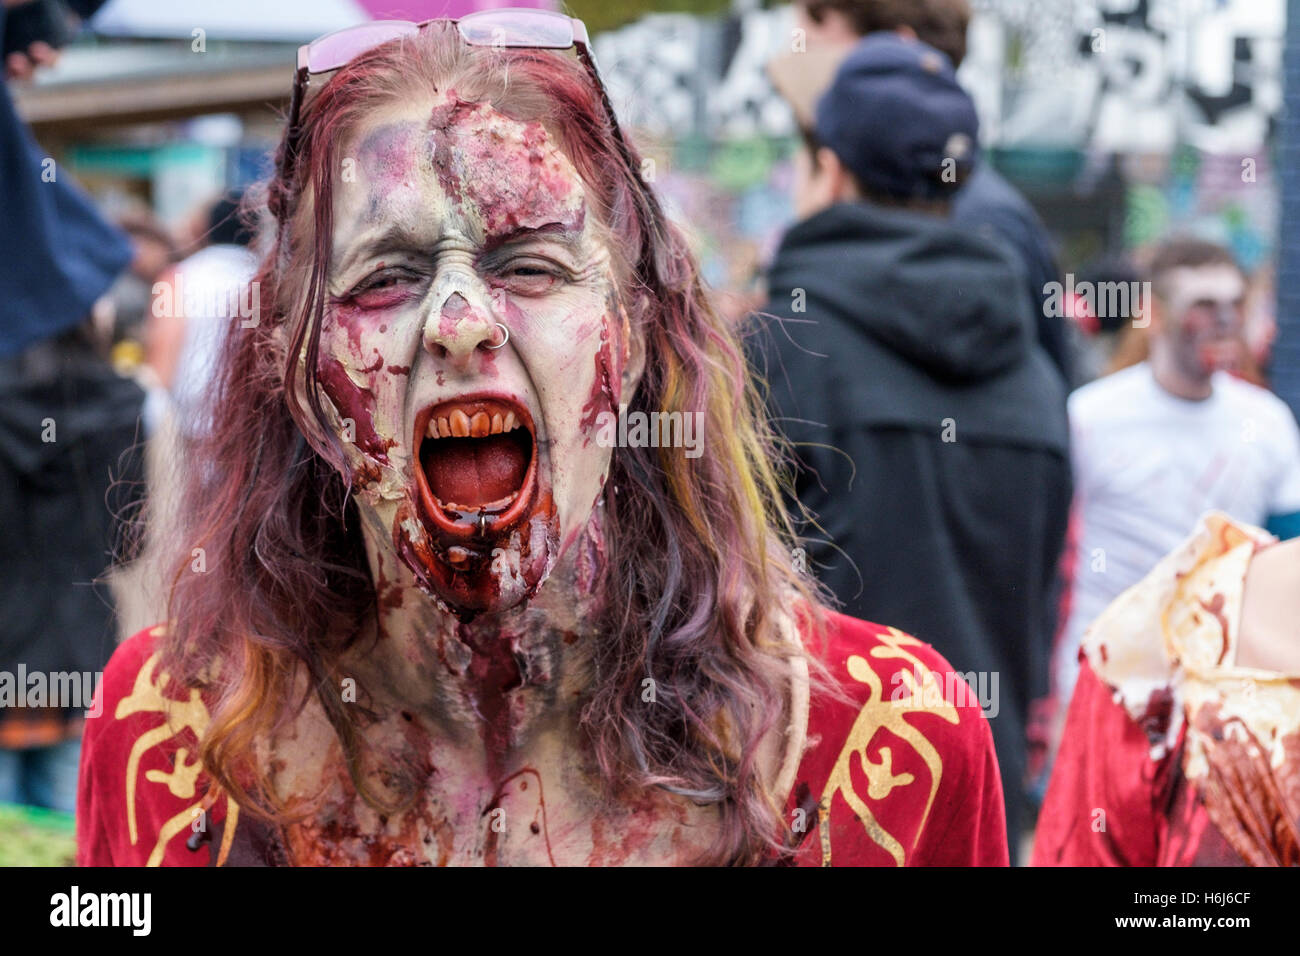 Bristol, UK. 29th Oct, 2016. A woman with a painted face,make up and dressed as a zombie is pictured as she participates in a Zombie Walk In Bristol. Credit:  lynchpics/Alamy Live News Stock Photo